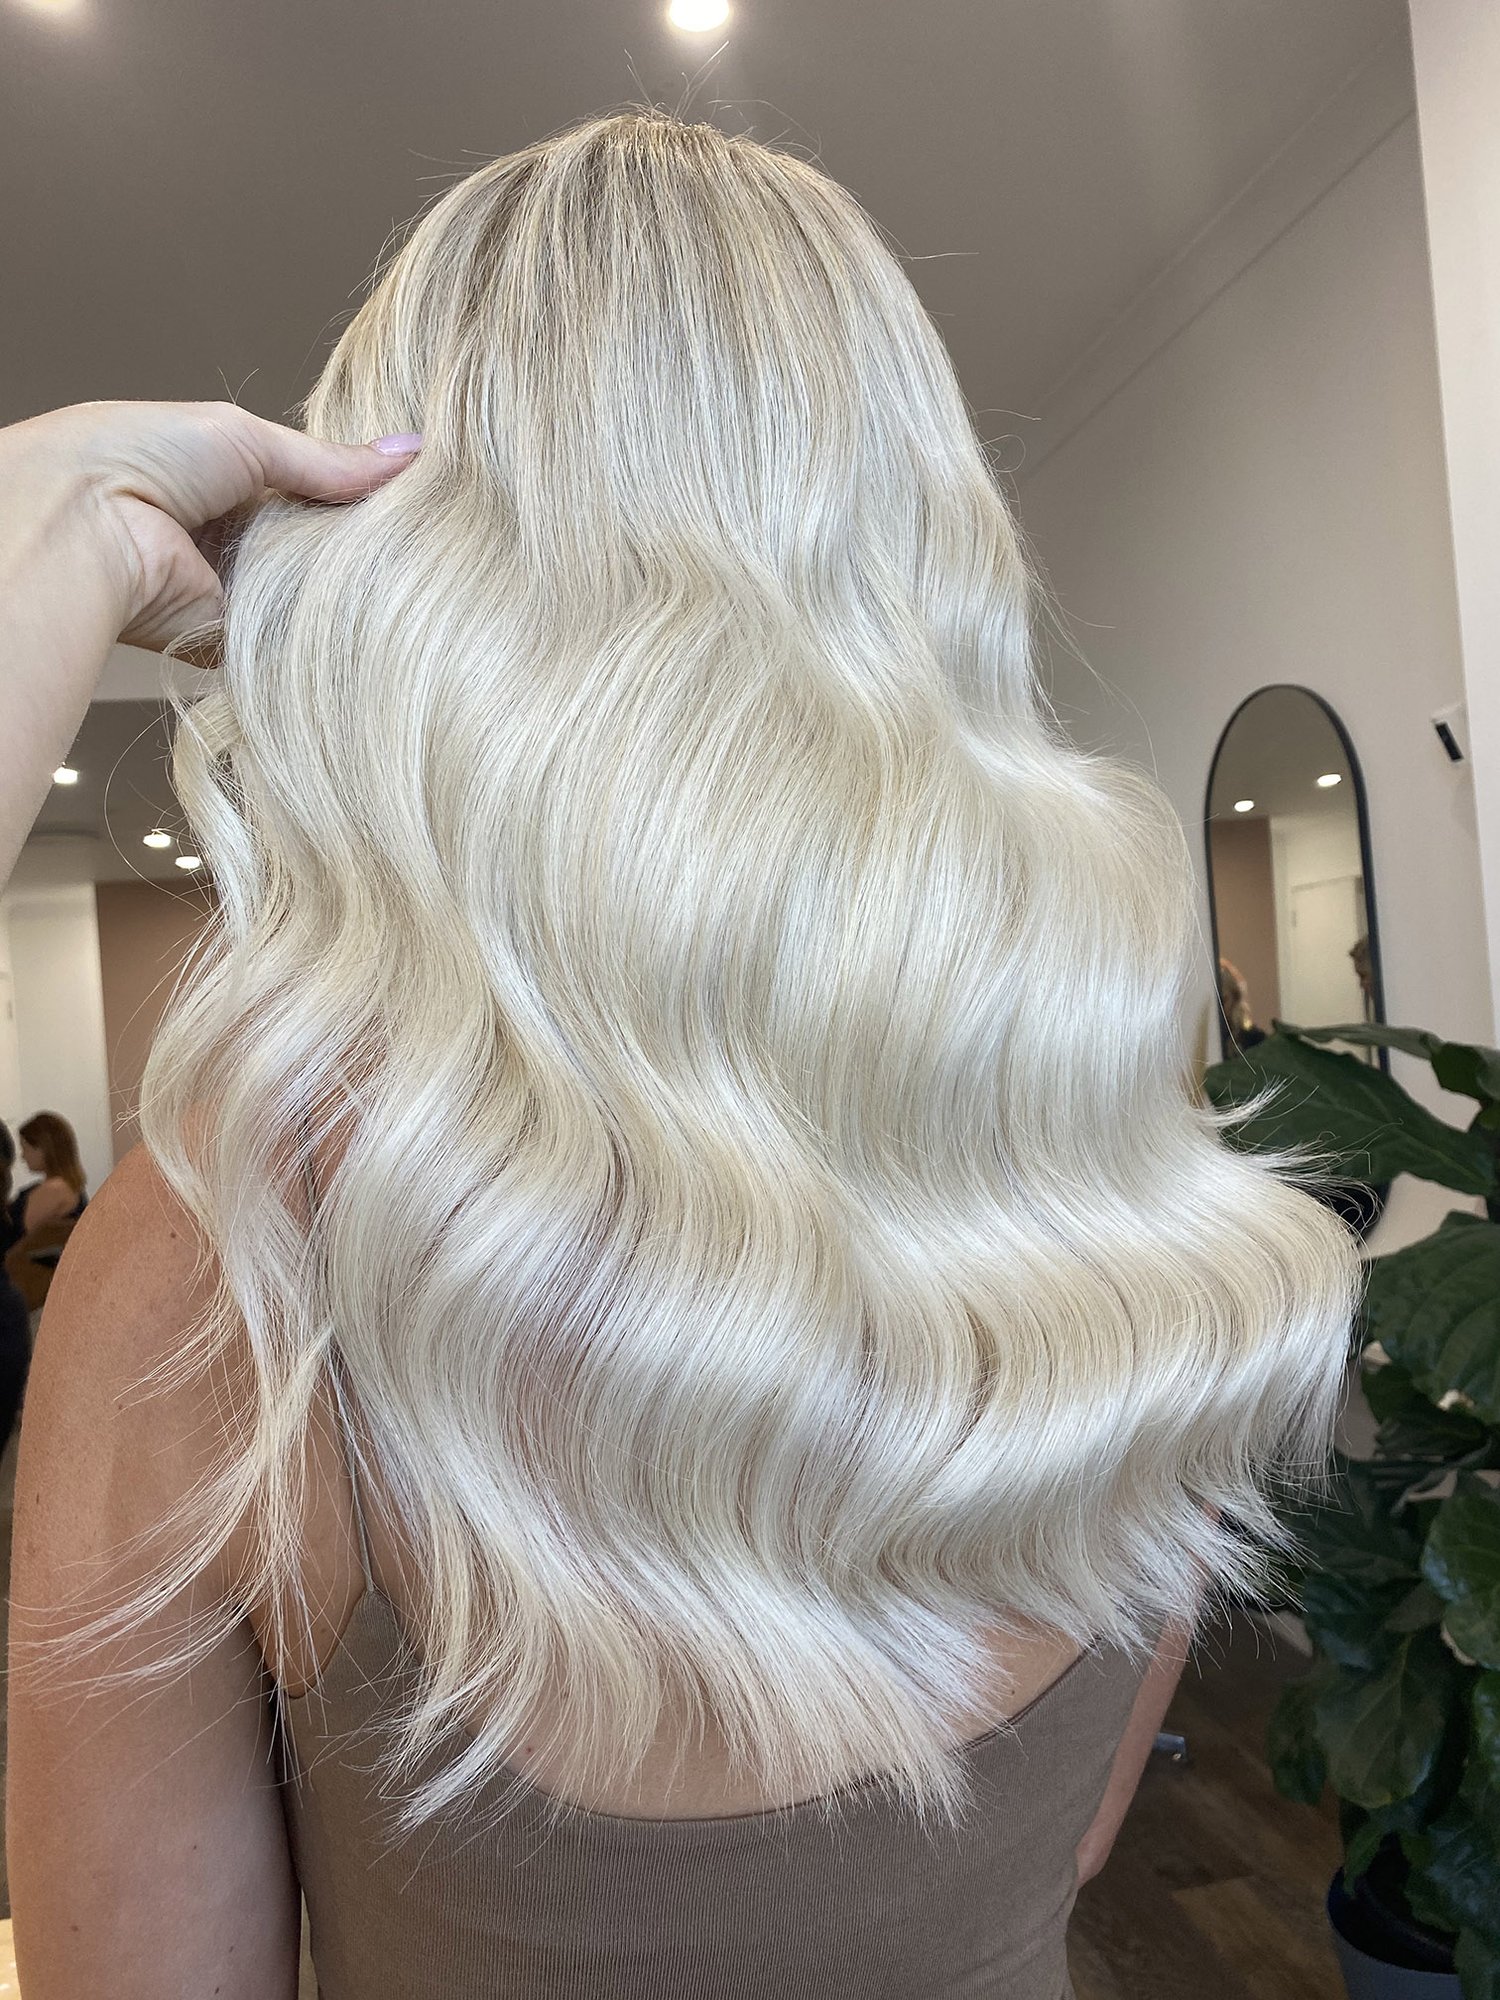 Best Weft Hair Extensions by Hair Candy Hair Extensions — Hair Candy  Extensions Australia | #1 Hair Salon Gold Coast